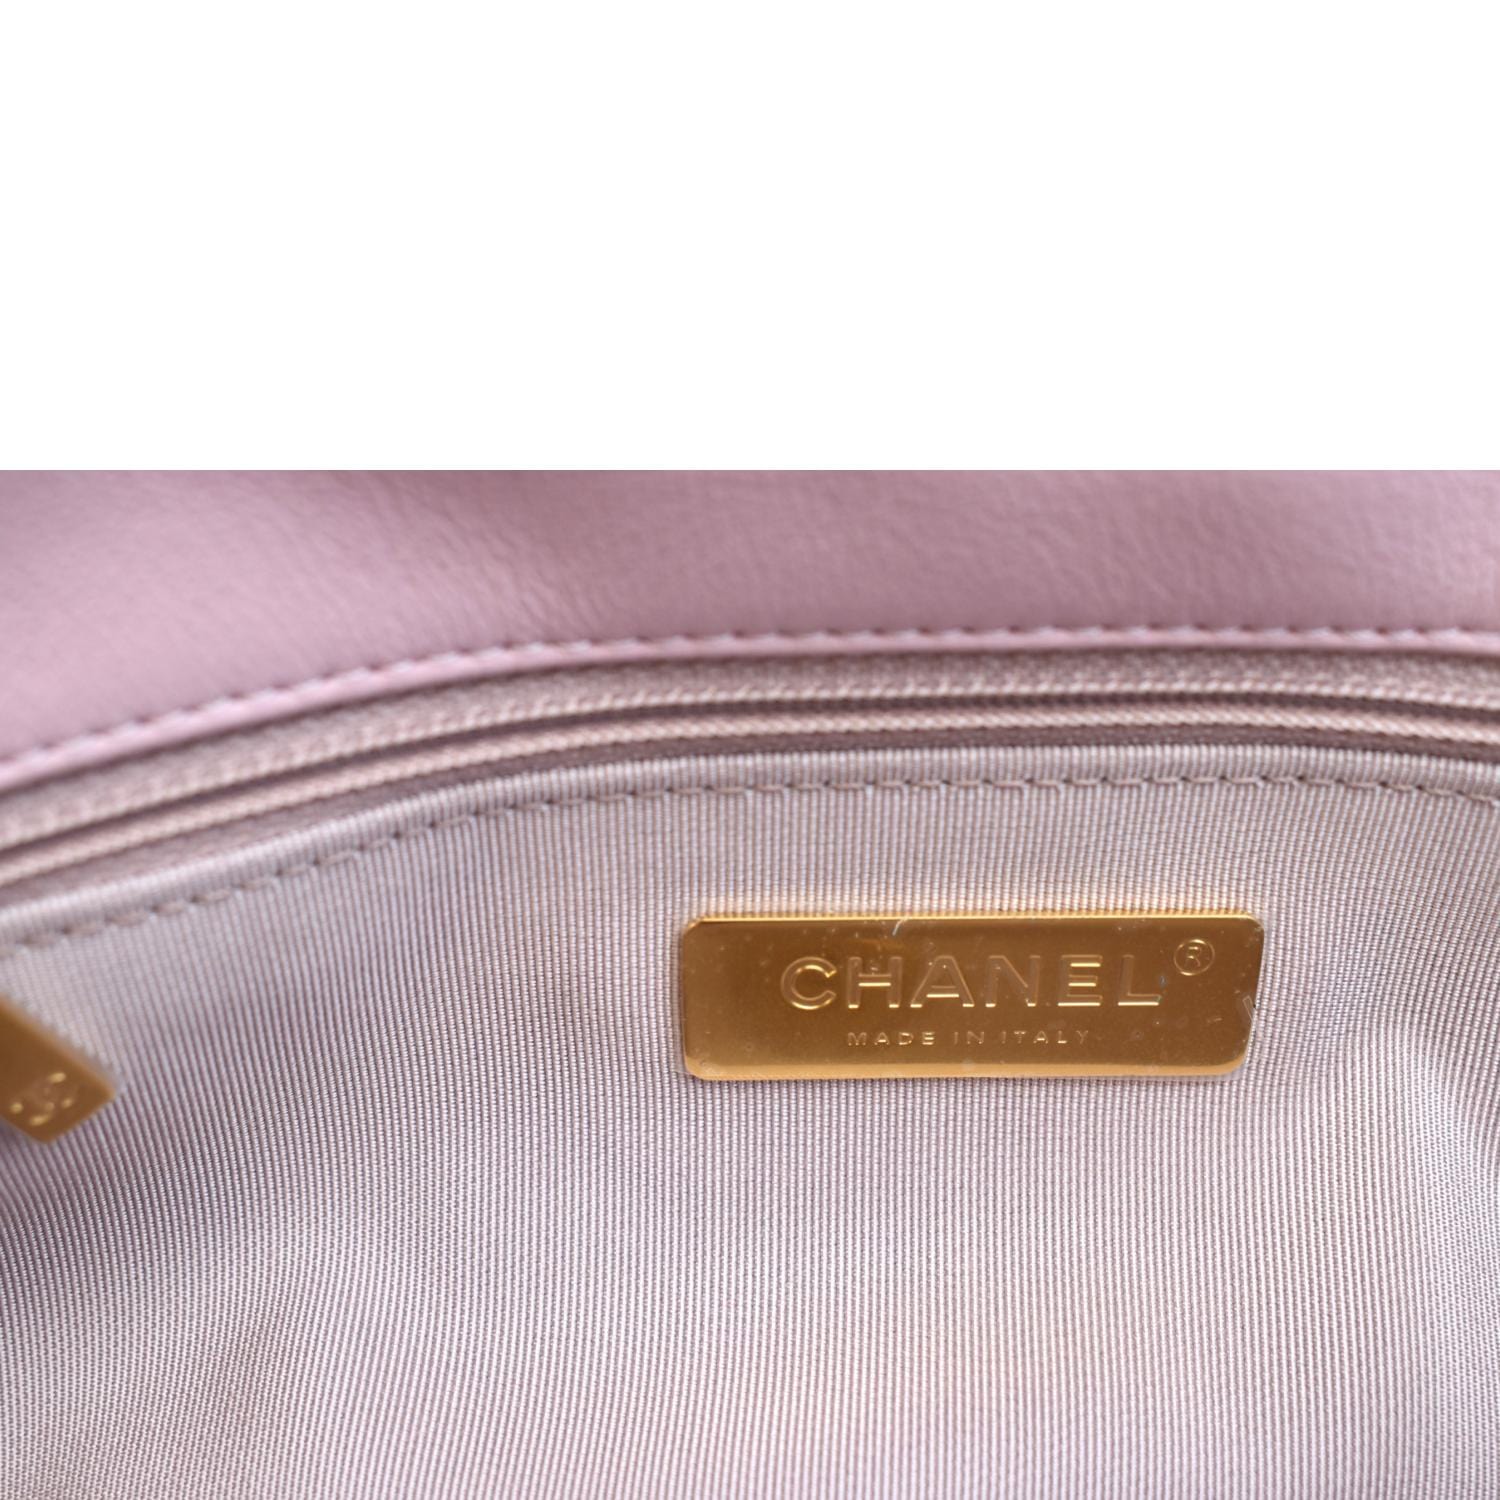 Chanel 19 Flap Bag Quilted Leather Medium Purple